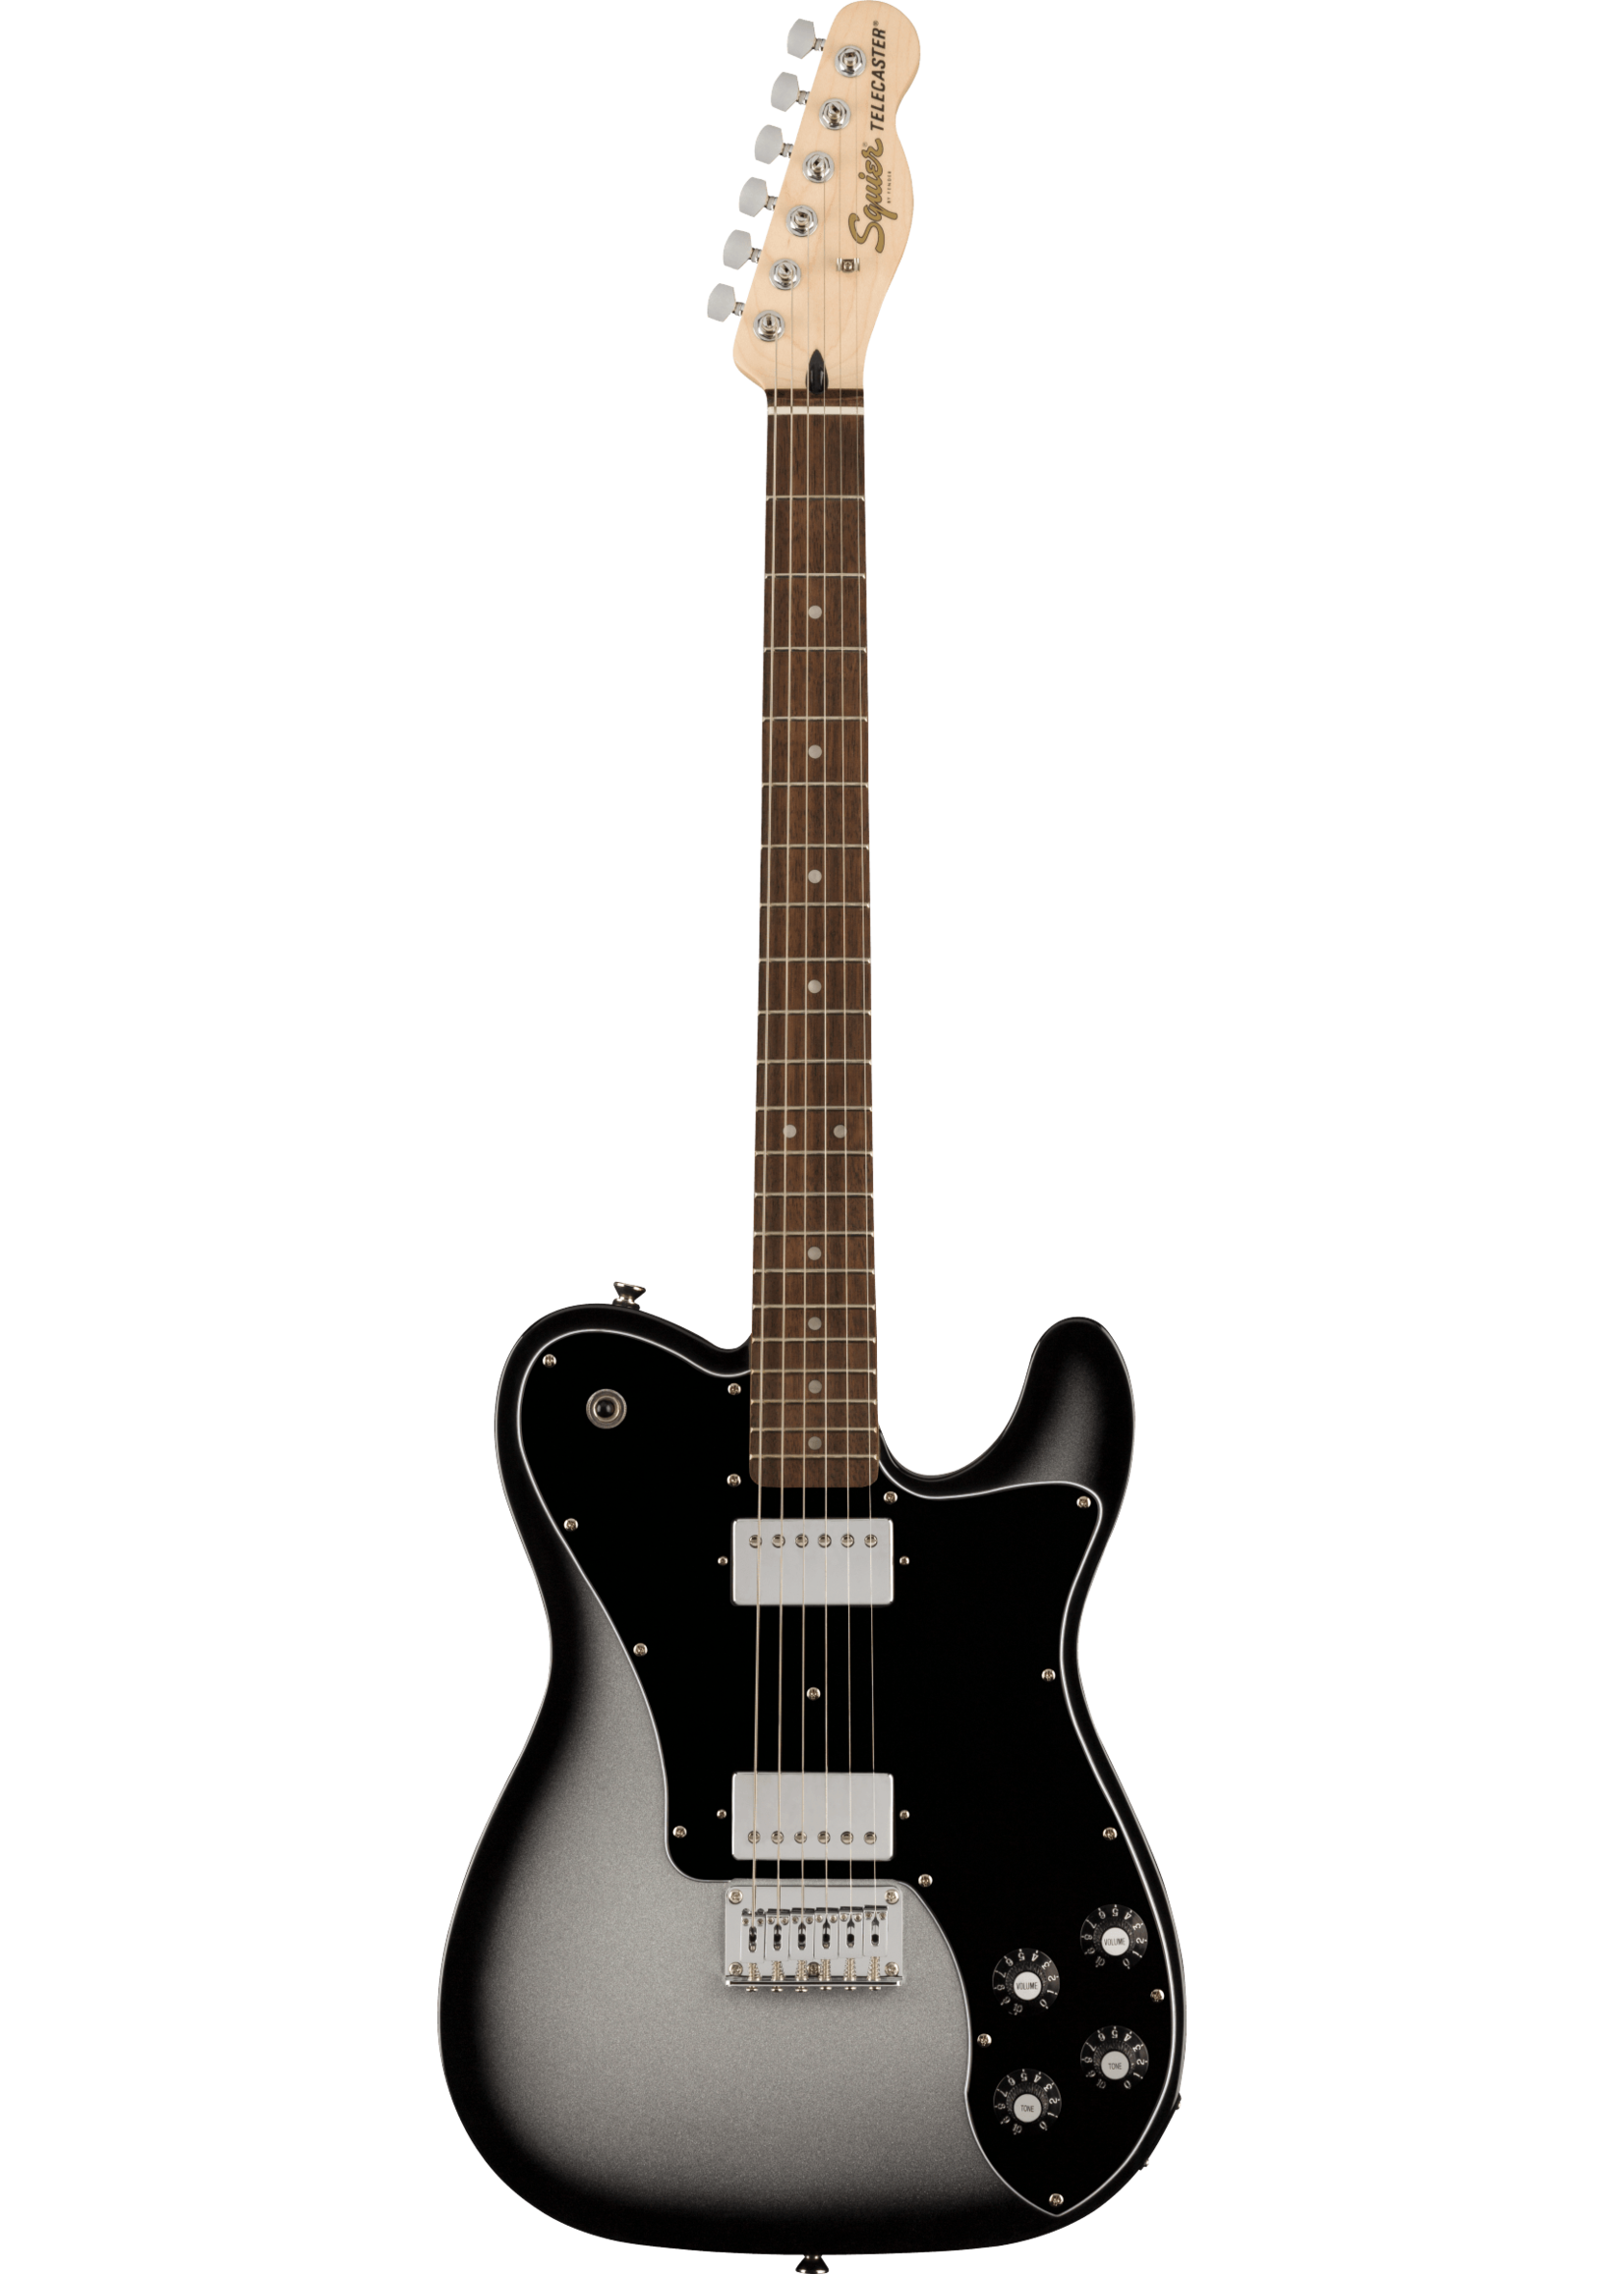 Squier Affinity Telecaster Deluxe - Silverburst